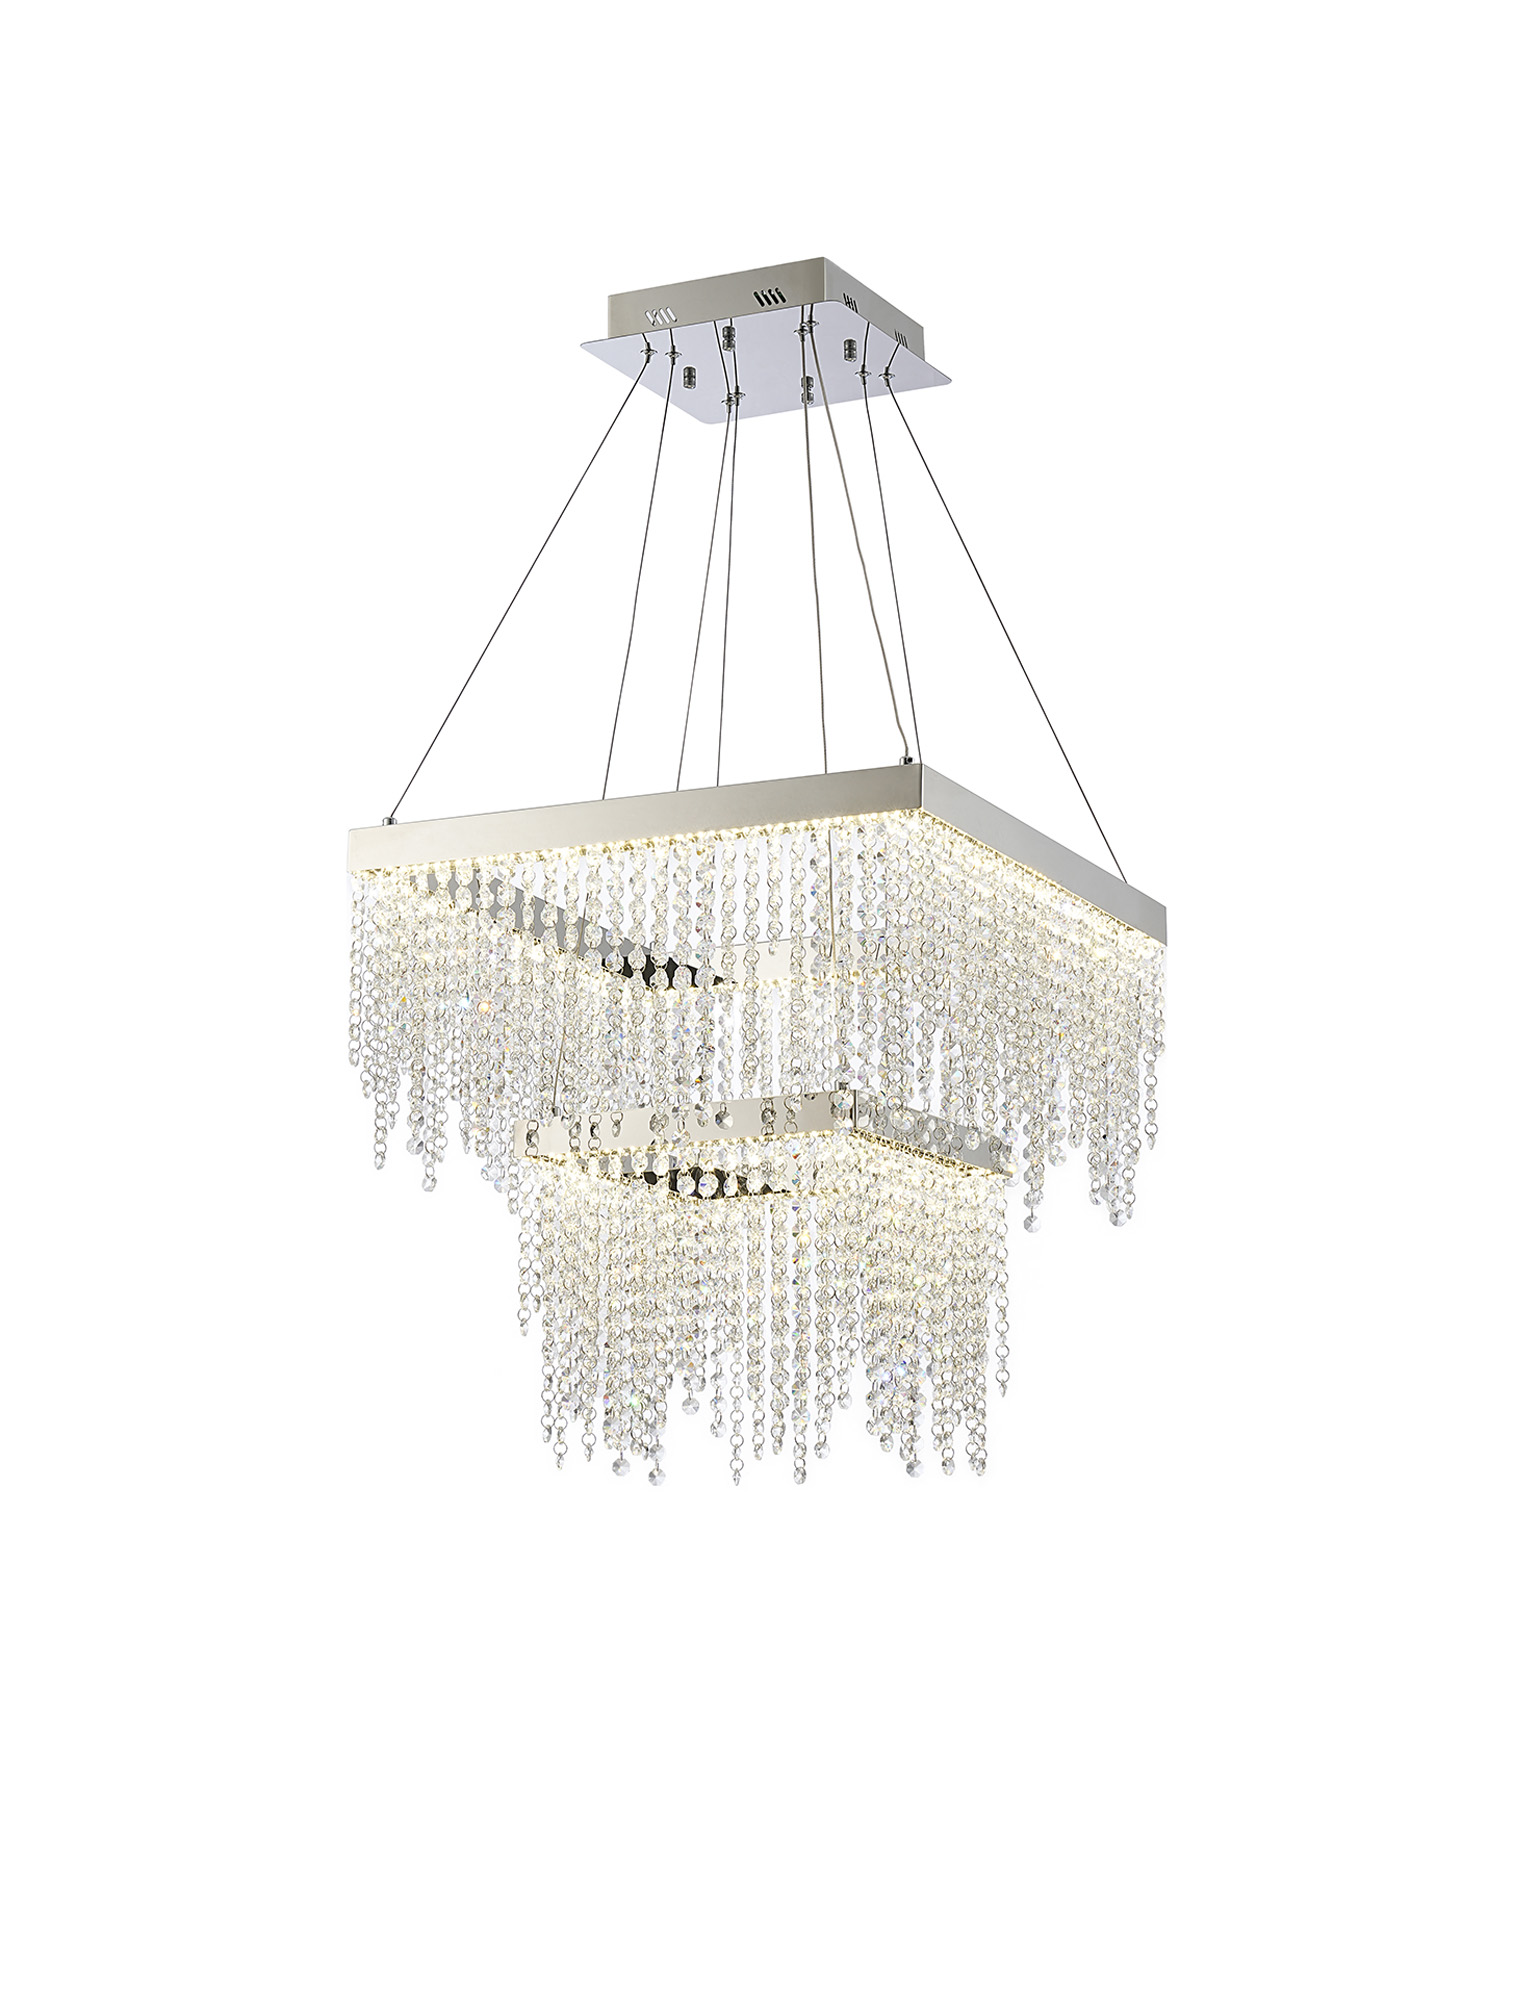 IL32863  Bano Square Dimmable 2 Tier Pendant 47W LED Polished Chrome